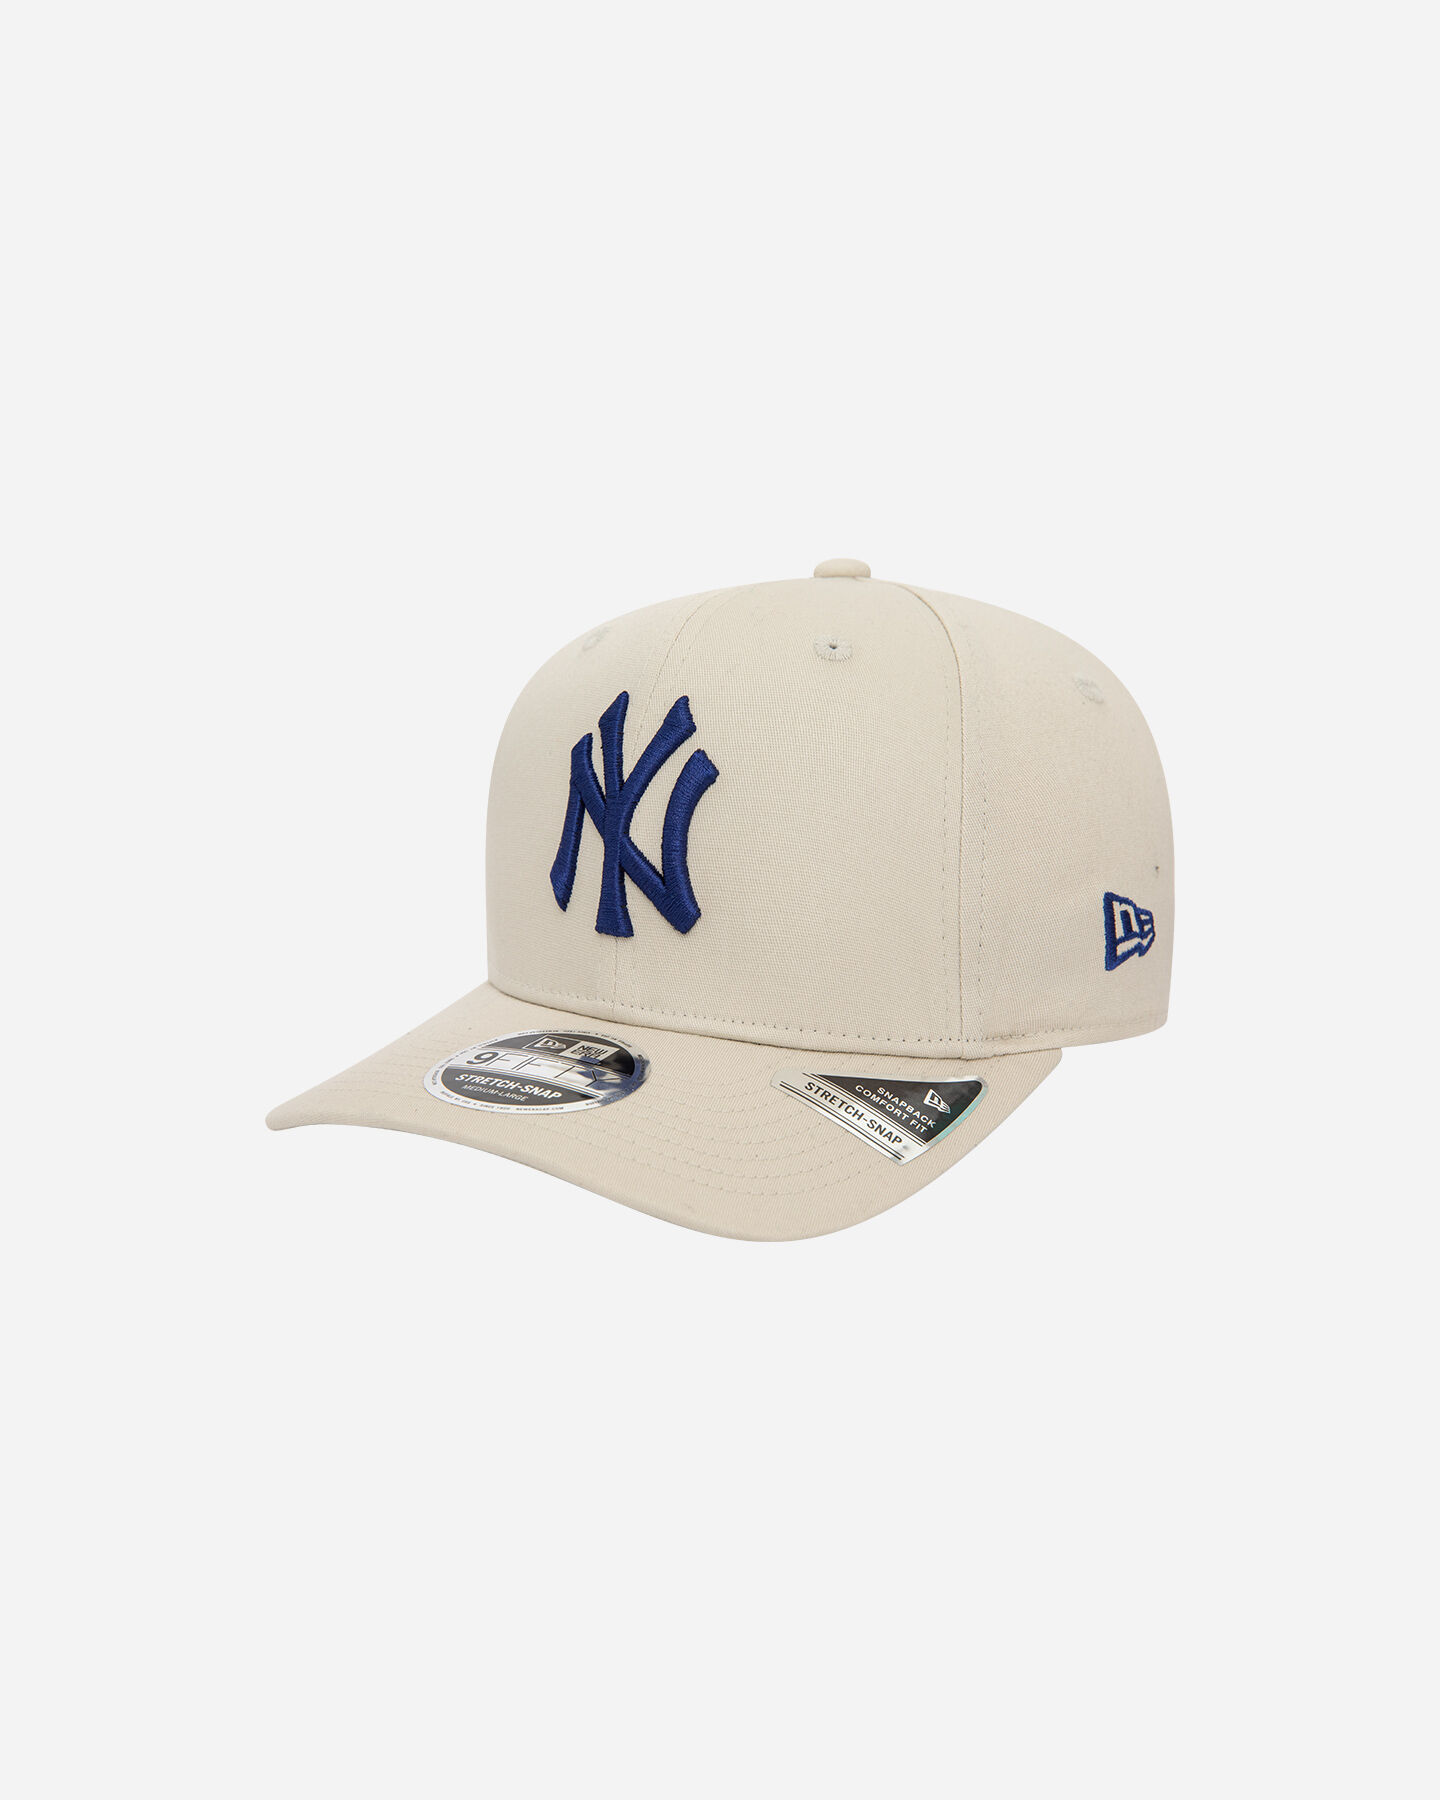  Cappellino NEW ERA 9FIFTY NEW YORK YANKEES M S5670976|270|SM scatto 0